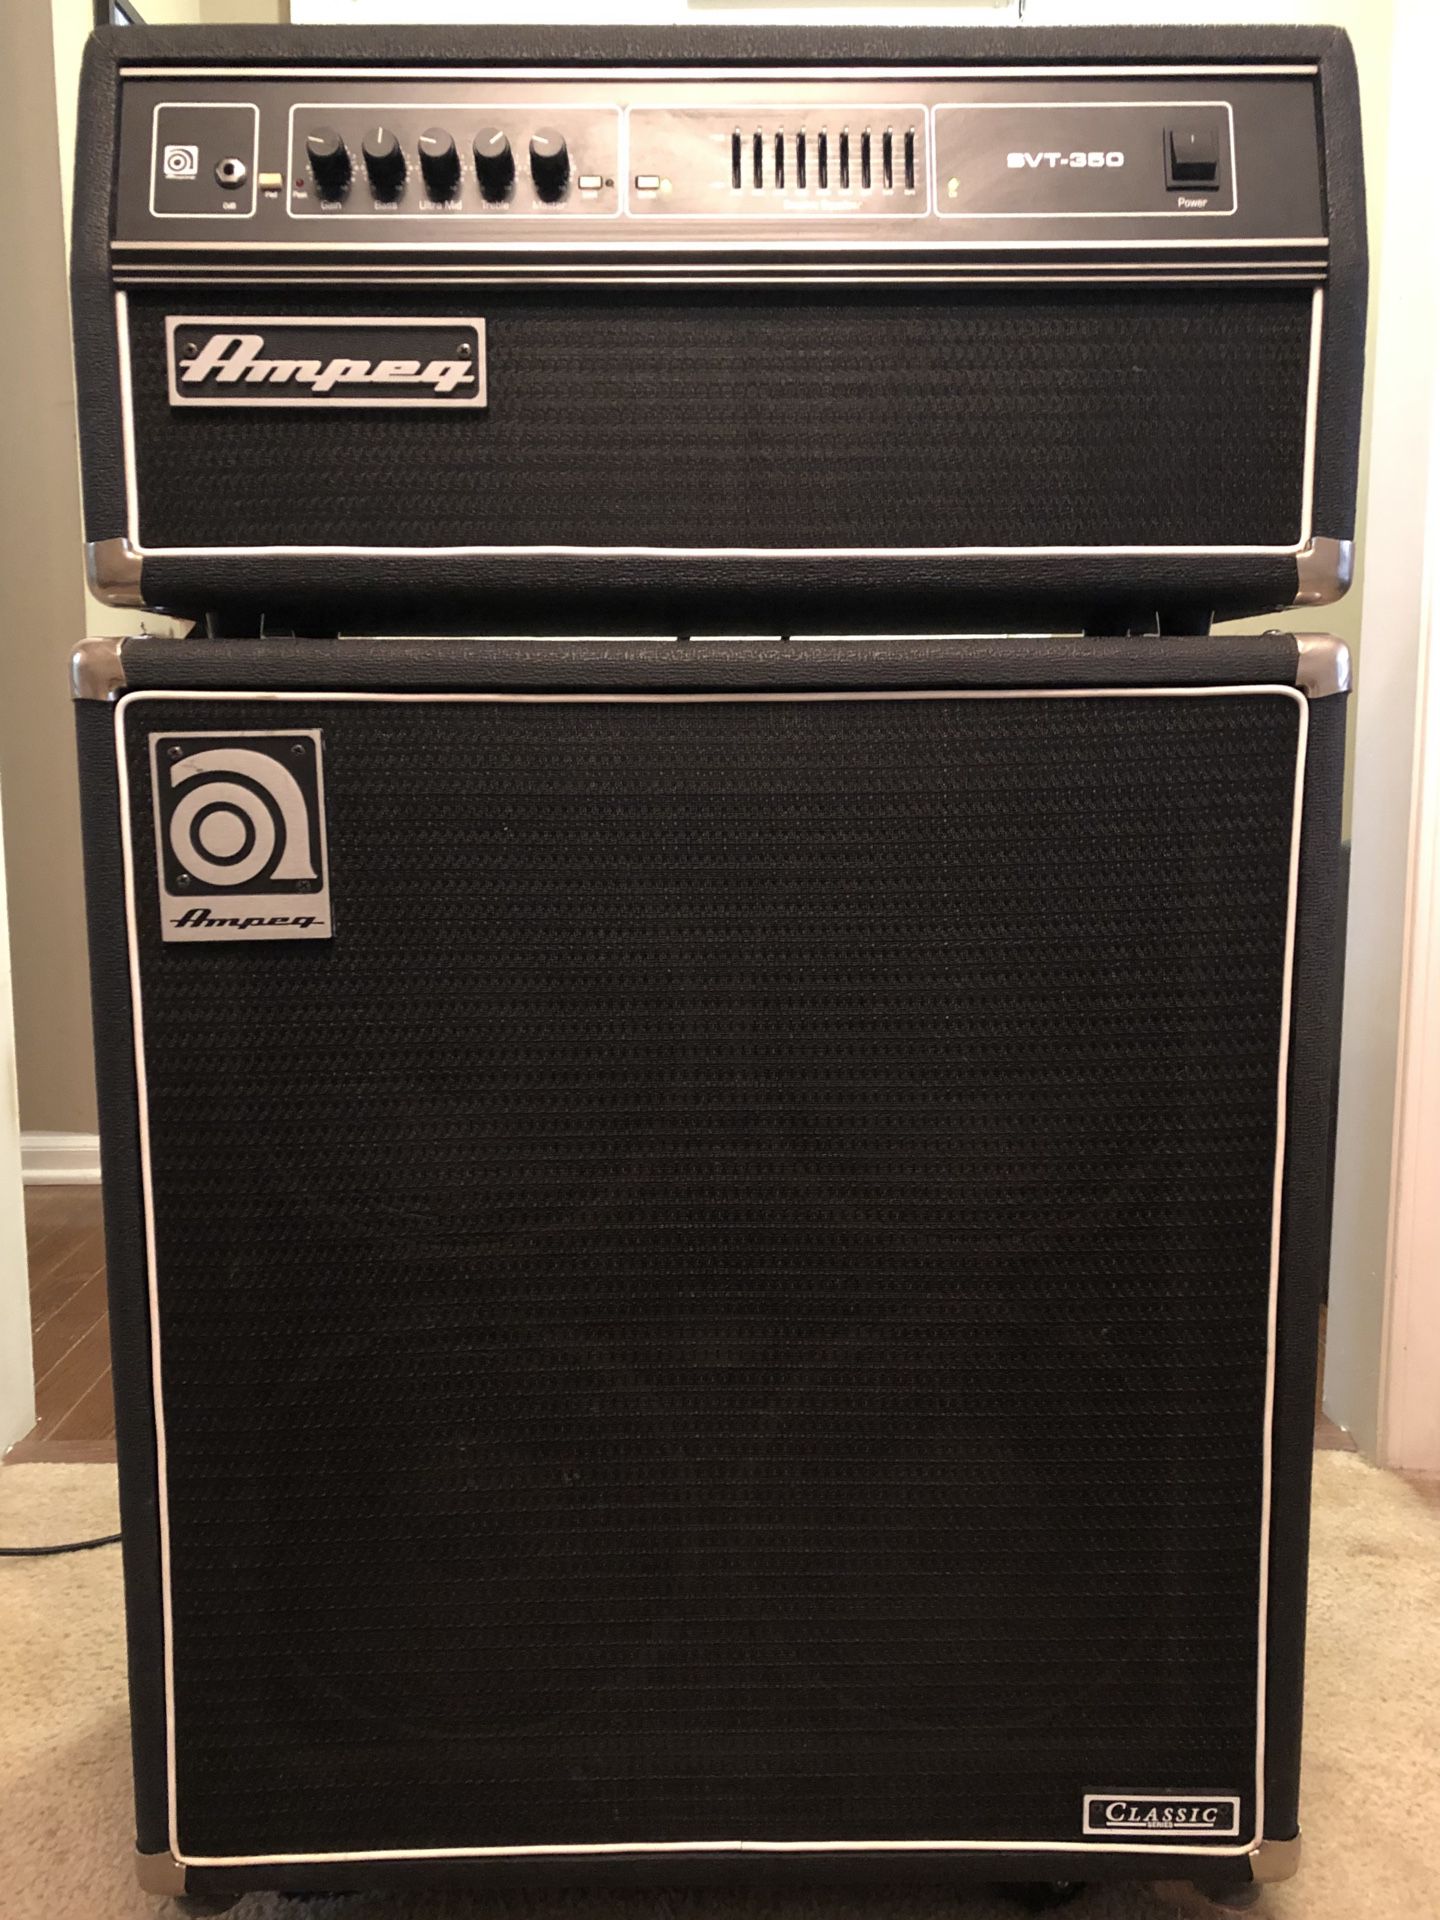 Amped SVT-350 with 4x10 Cabinet